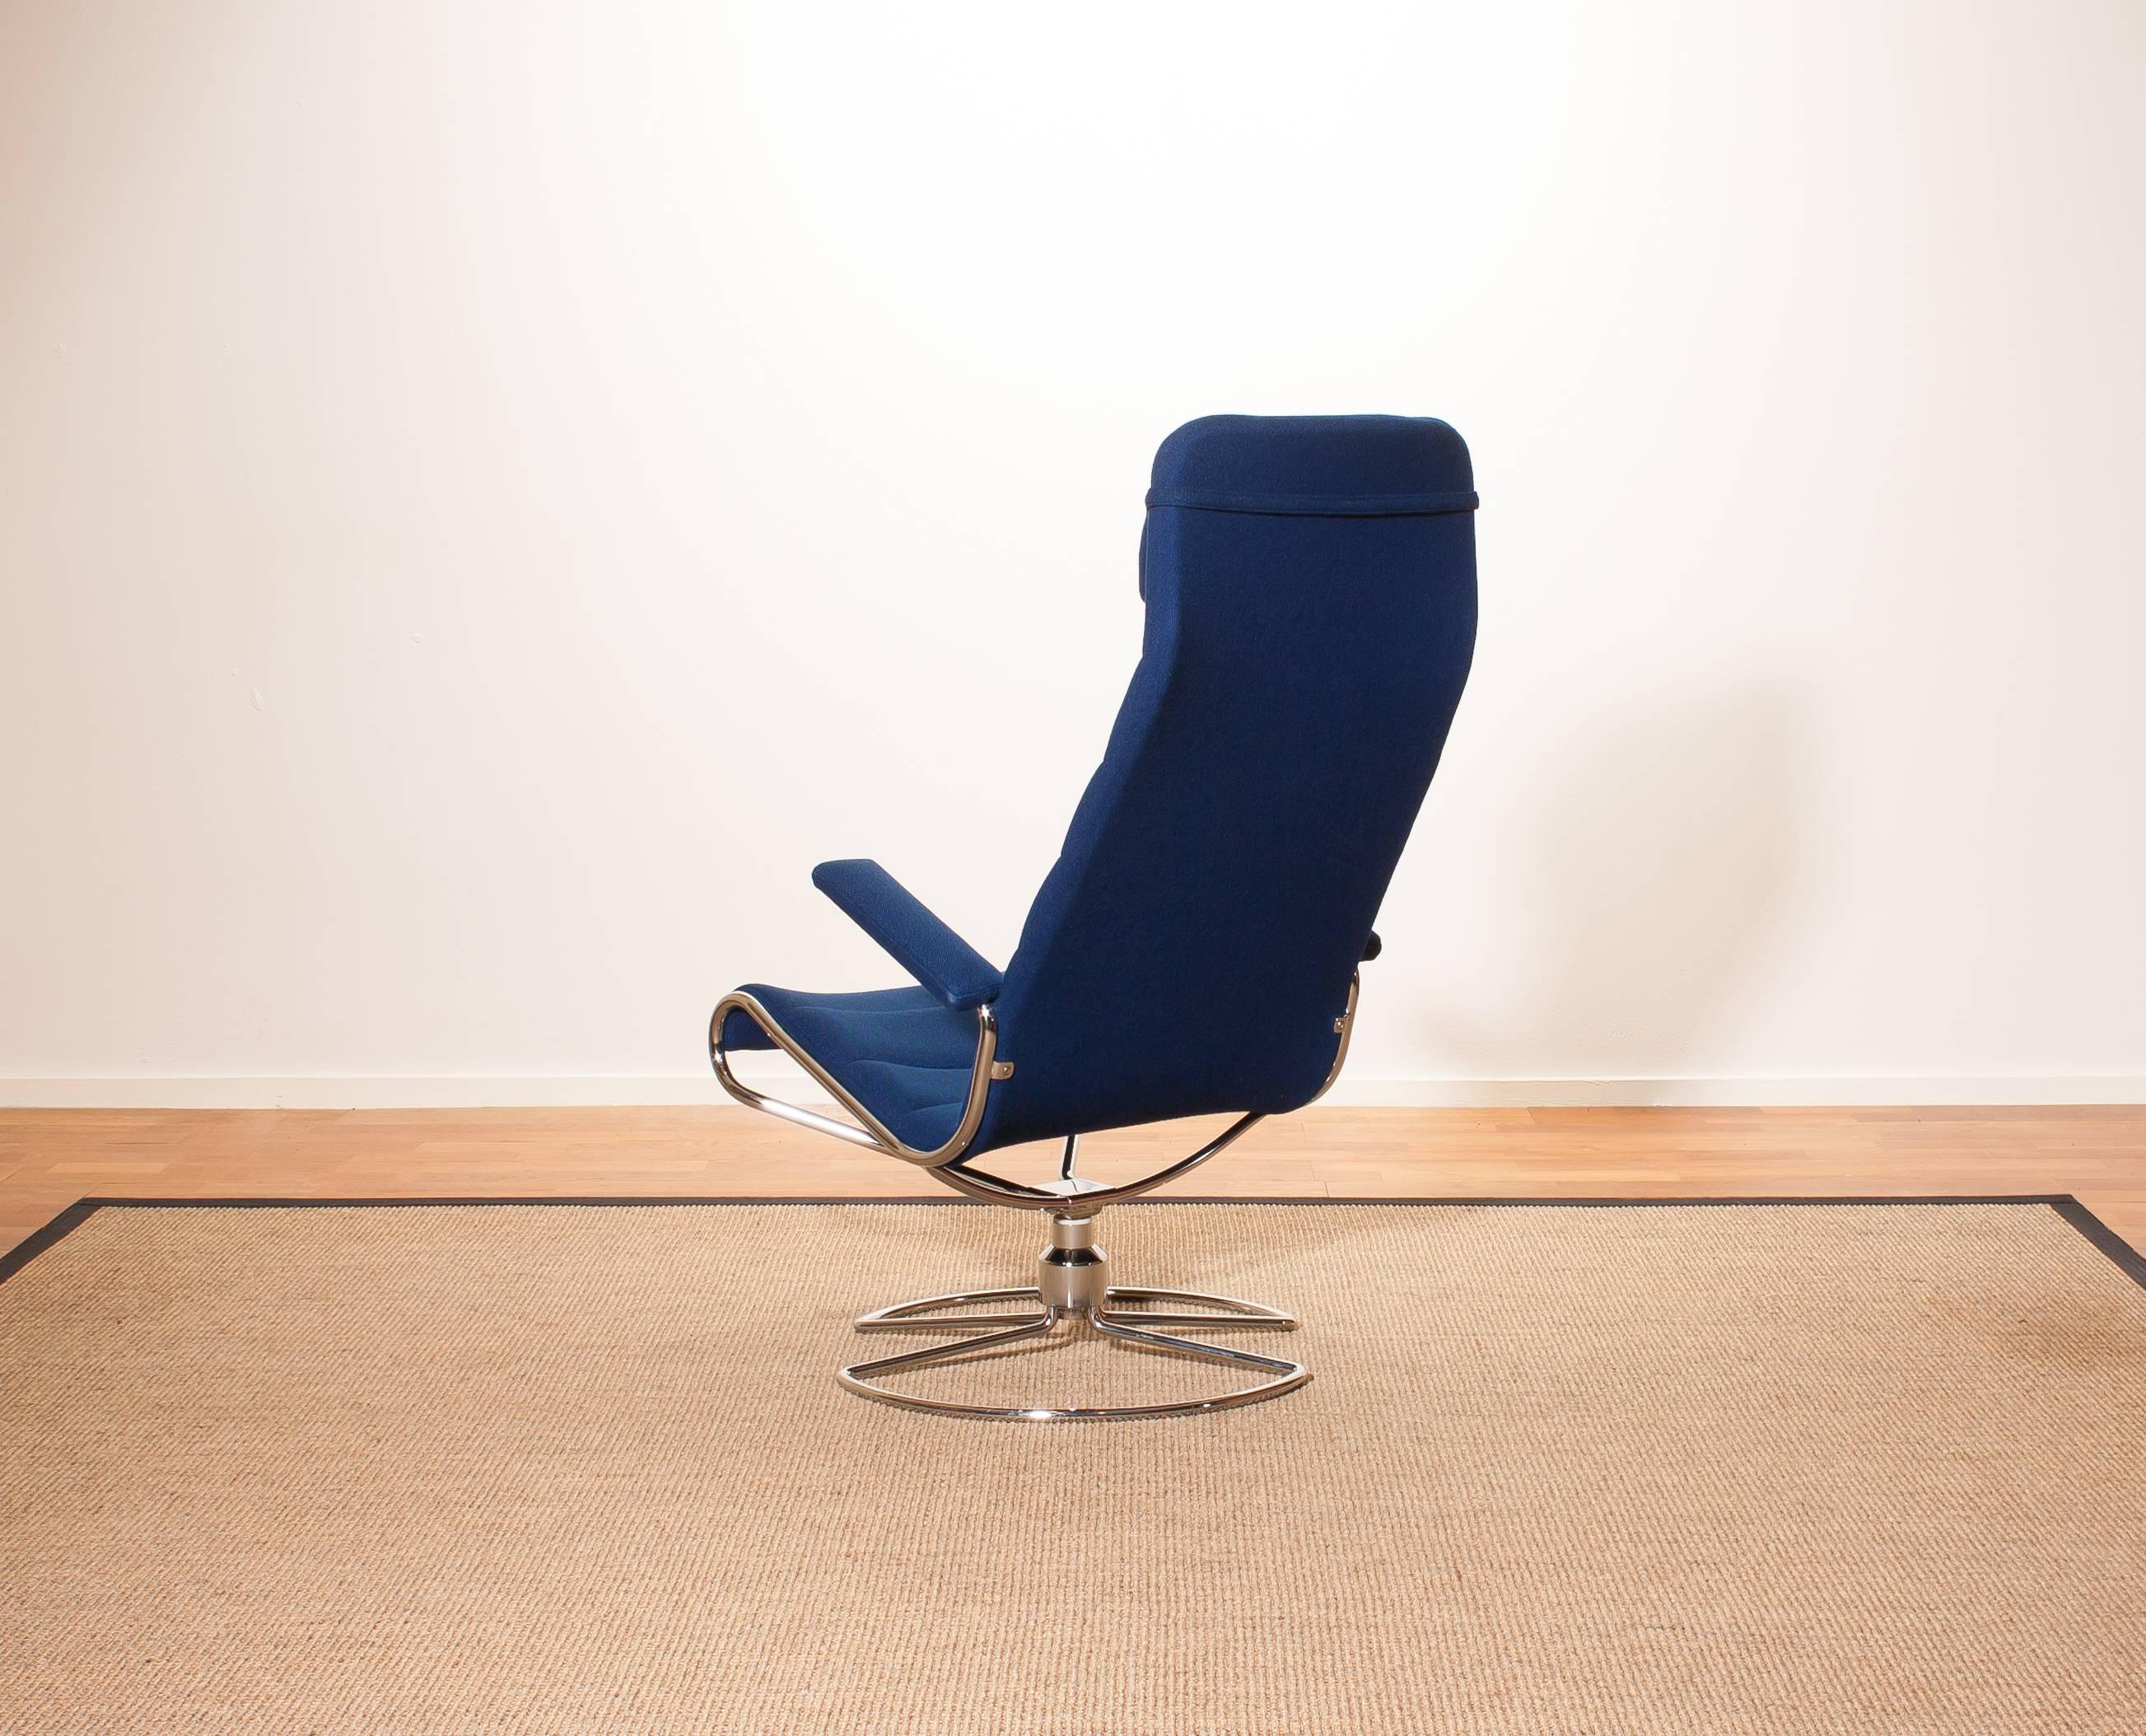 1980s, Royal Blue 'Minister' Chair by Bruno Mathsson In Excellent Condition In Silvolde, Gelderland